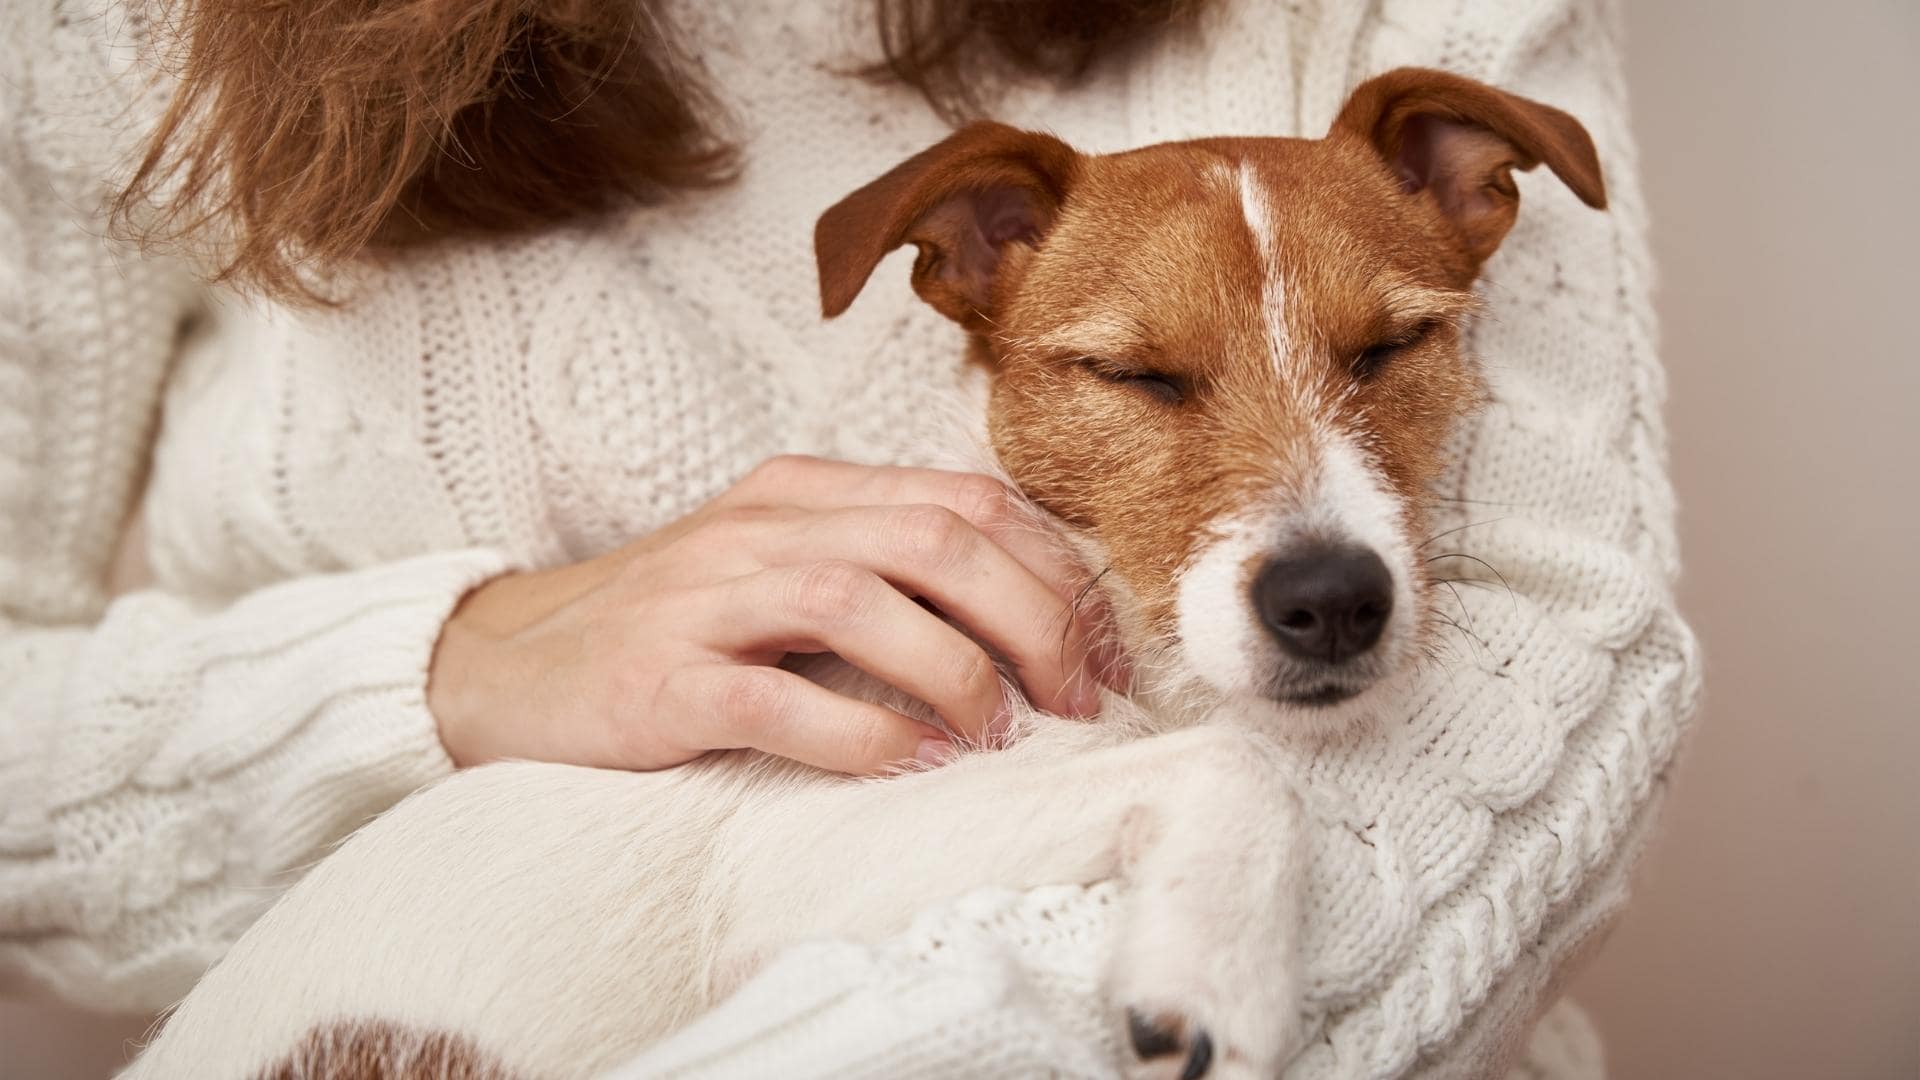 Why Does My Dog Lay On Me? 9 Reasons Why Dogs Do this